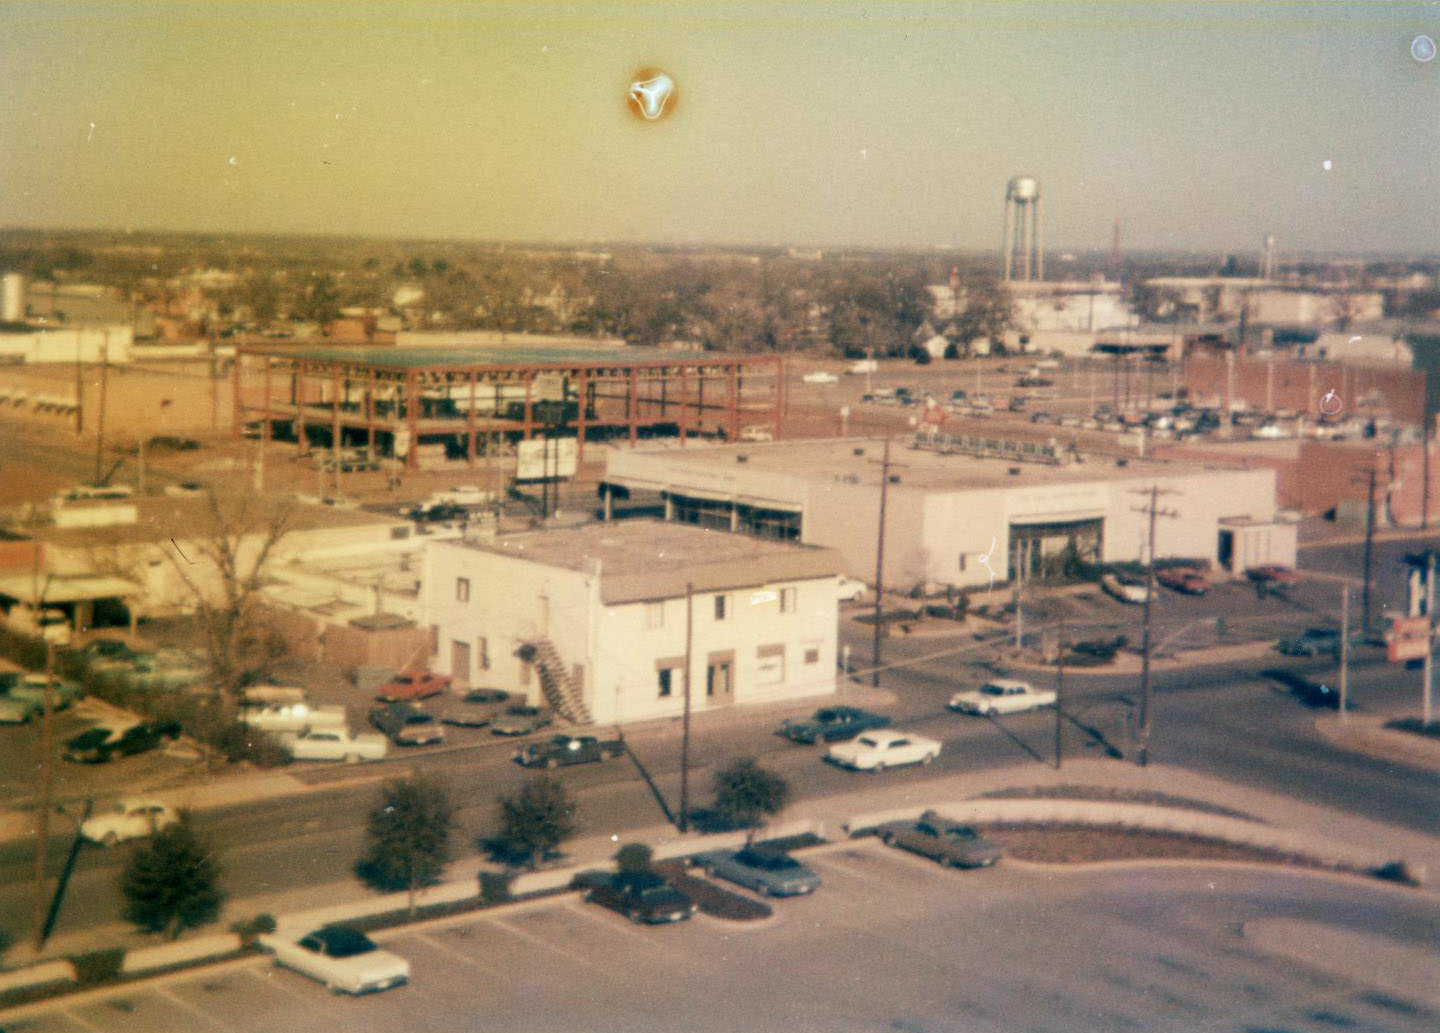 Downtown Arlington.1973. A bank is under construction. The photo appears to have been taken from the roof of the First Baptist Church, facing northeast.